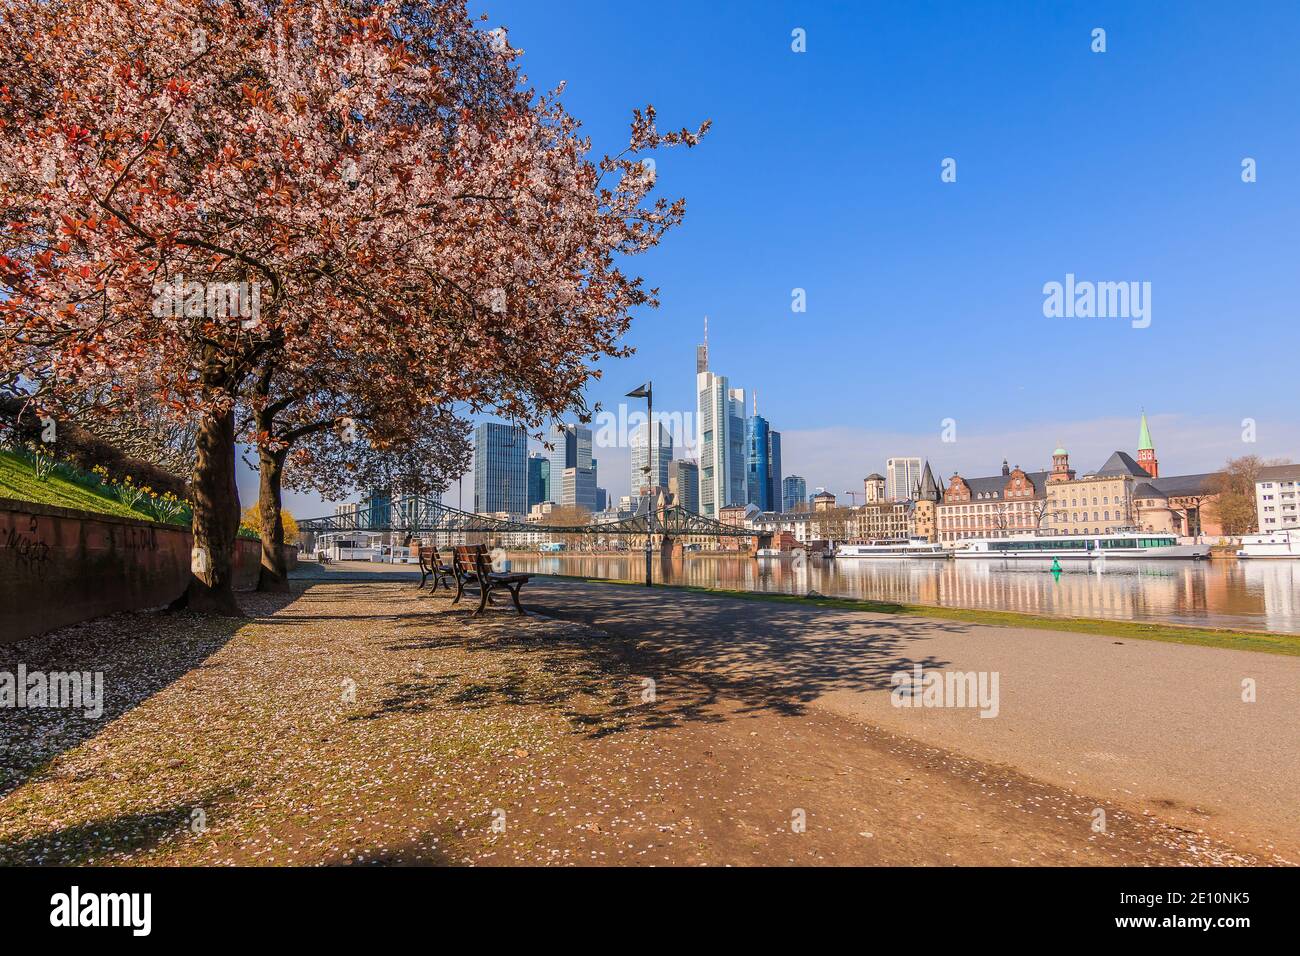 Main riverbank in Frankfurt in spring. Path on the bank with flowers on the tree and benches. High-rise buildings from the financial district with ref Stock Photo